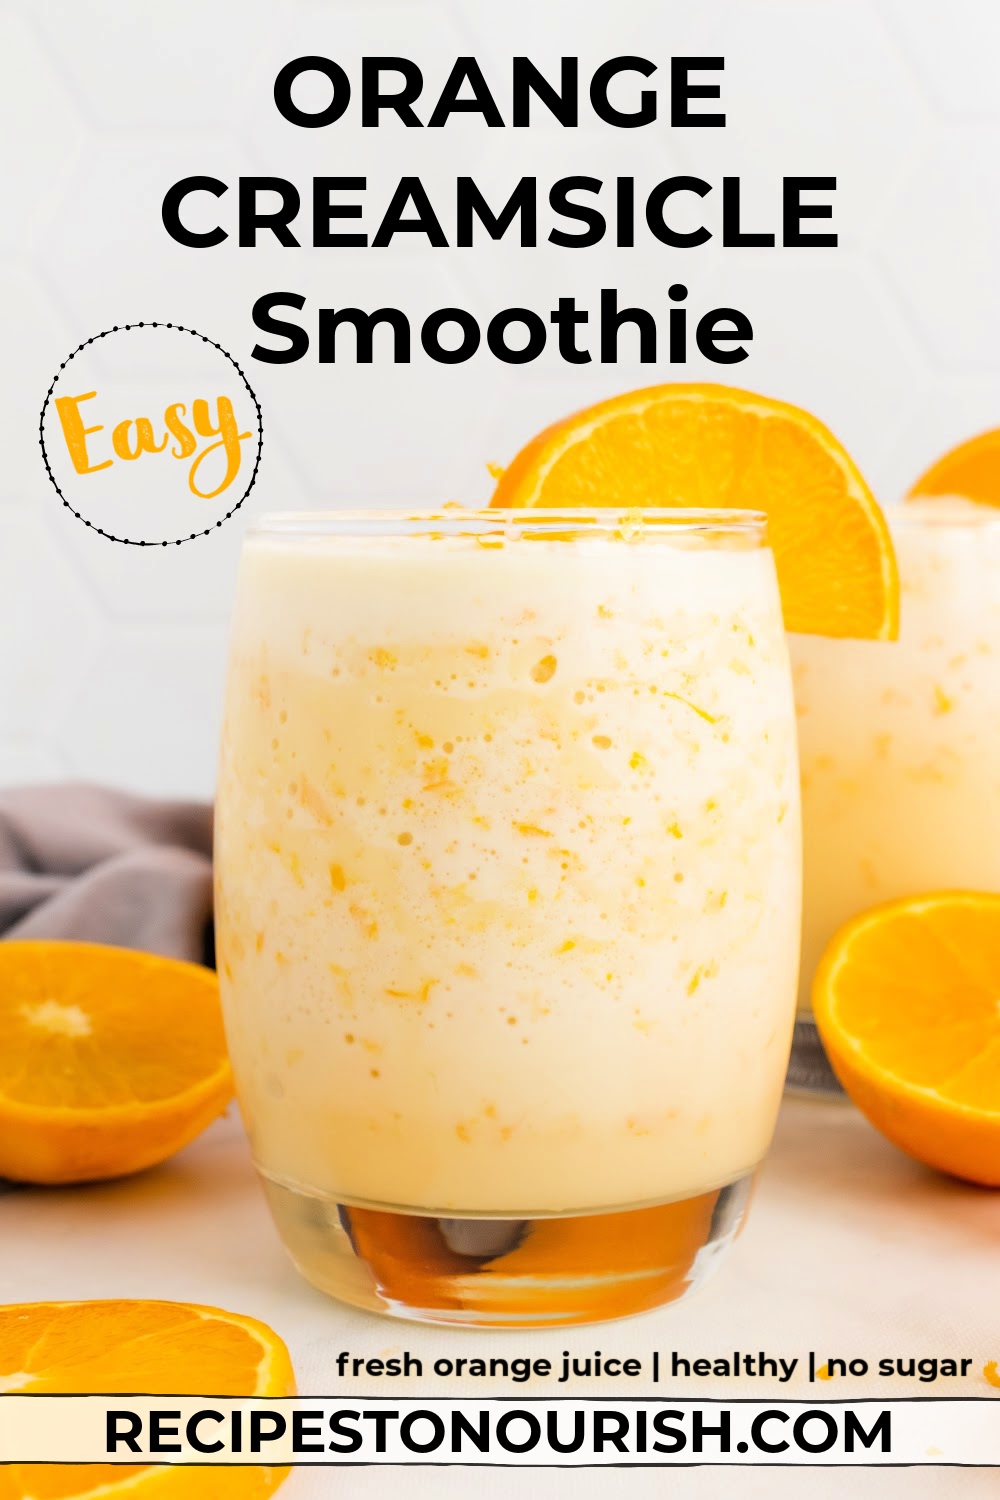 Creamy orange smoothie in a two glasses with fresh orange slices and whole oranges slices in the background and text that says Orange Creamsicle Smoothie, easy, fresh orange juice, healthy, no sugar.